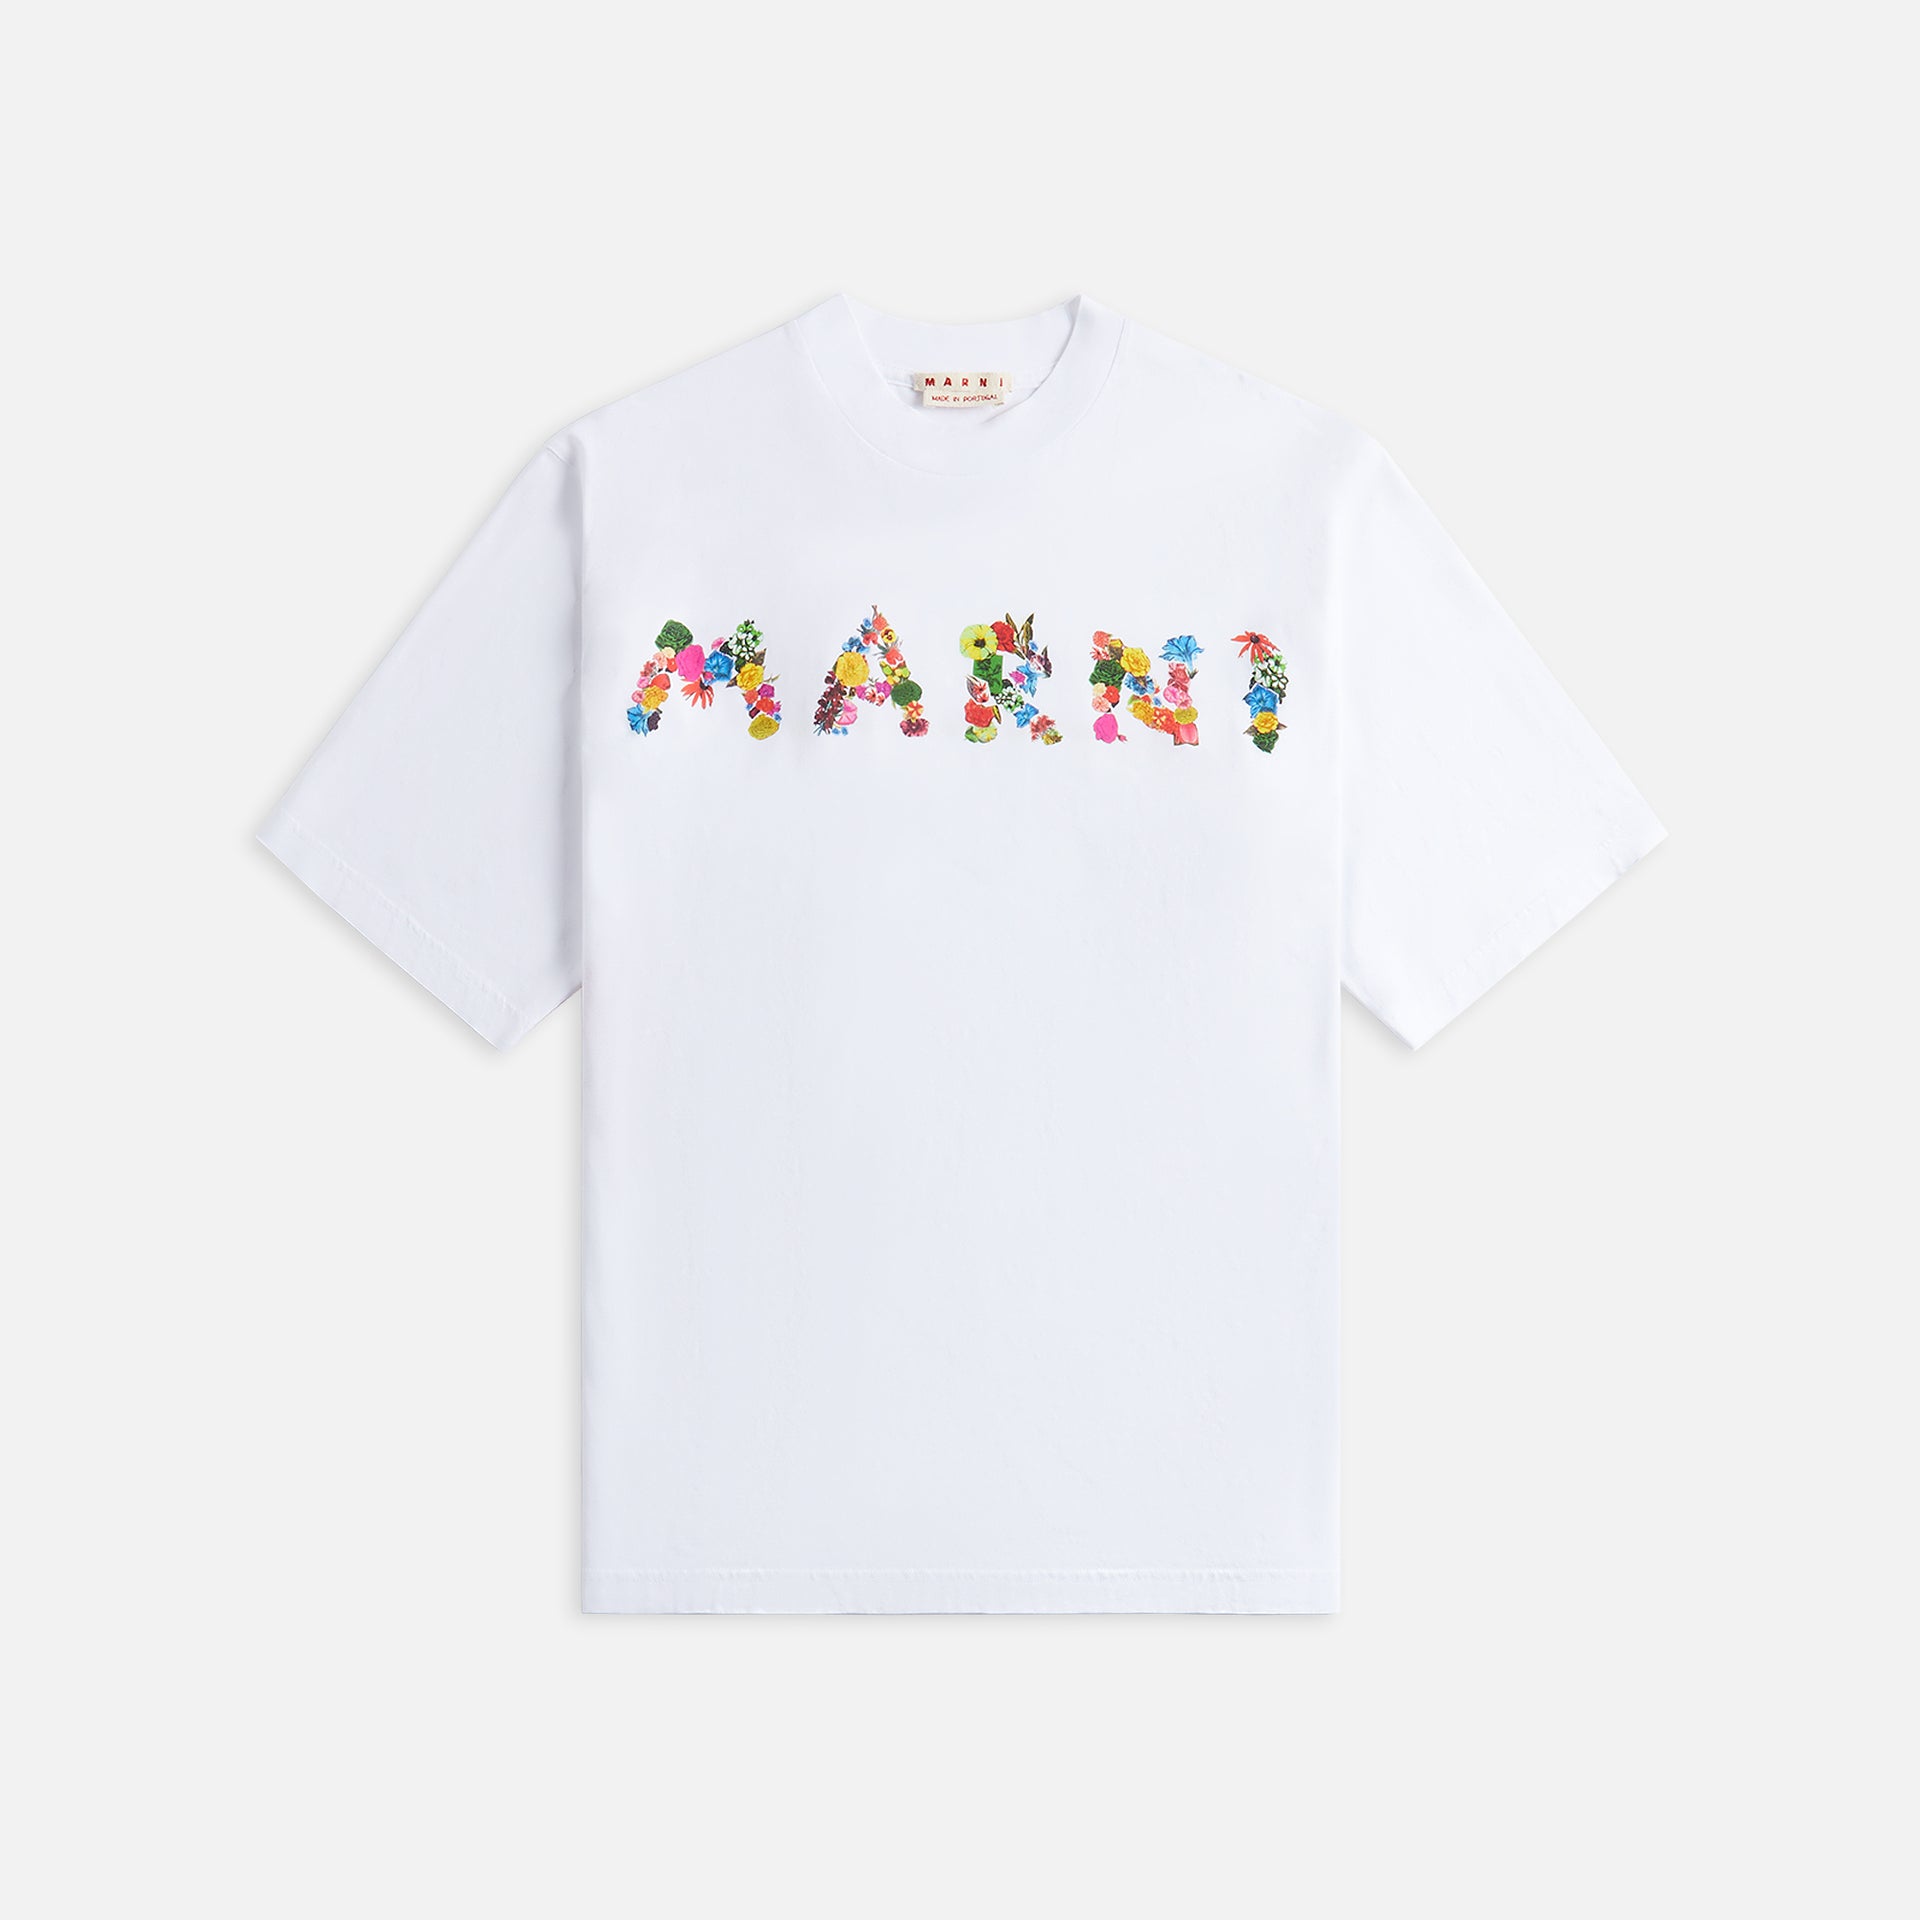 Marni HANDBAG Collage Bouquet Jersey Tee - Lily White